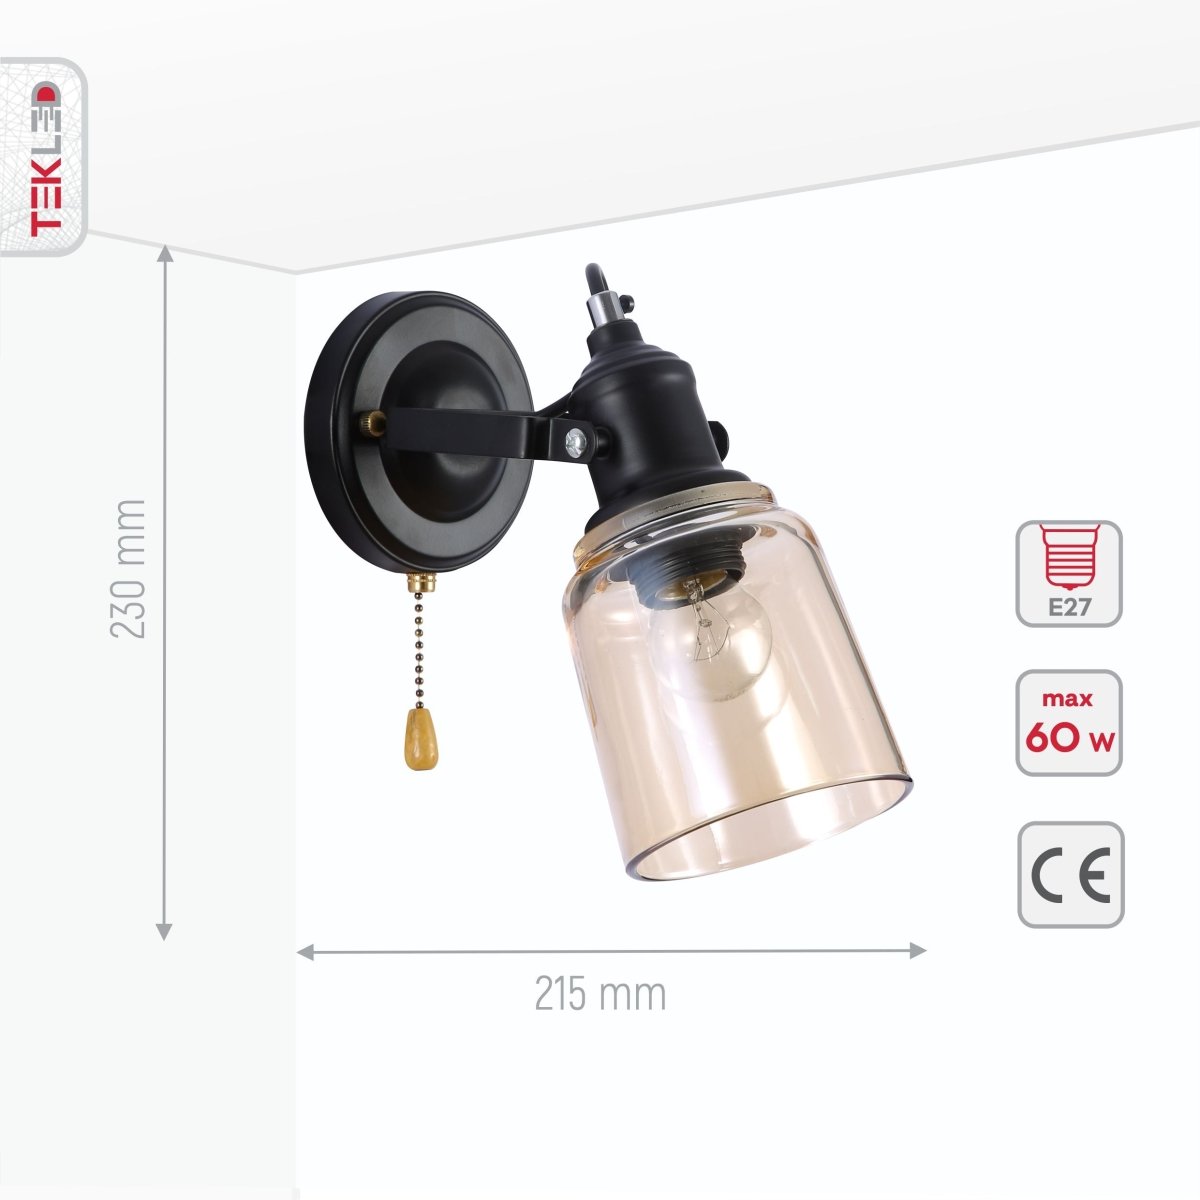 Product dimensions of amber glass cone wall light e27 and pull down switch